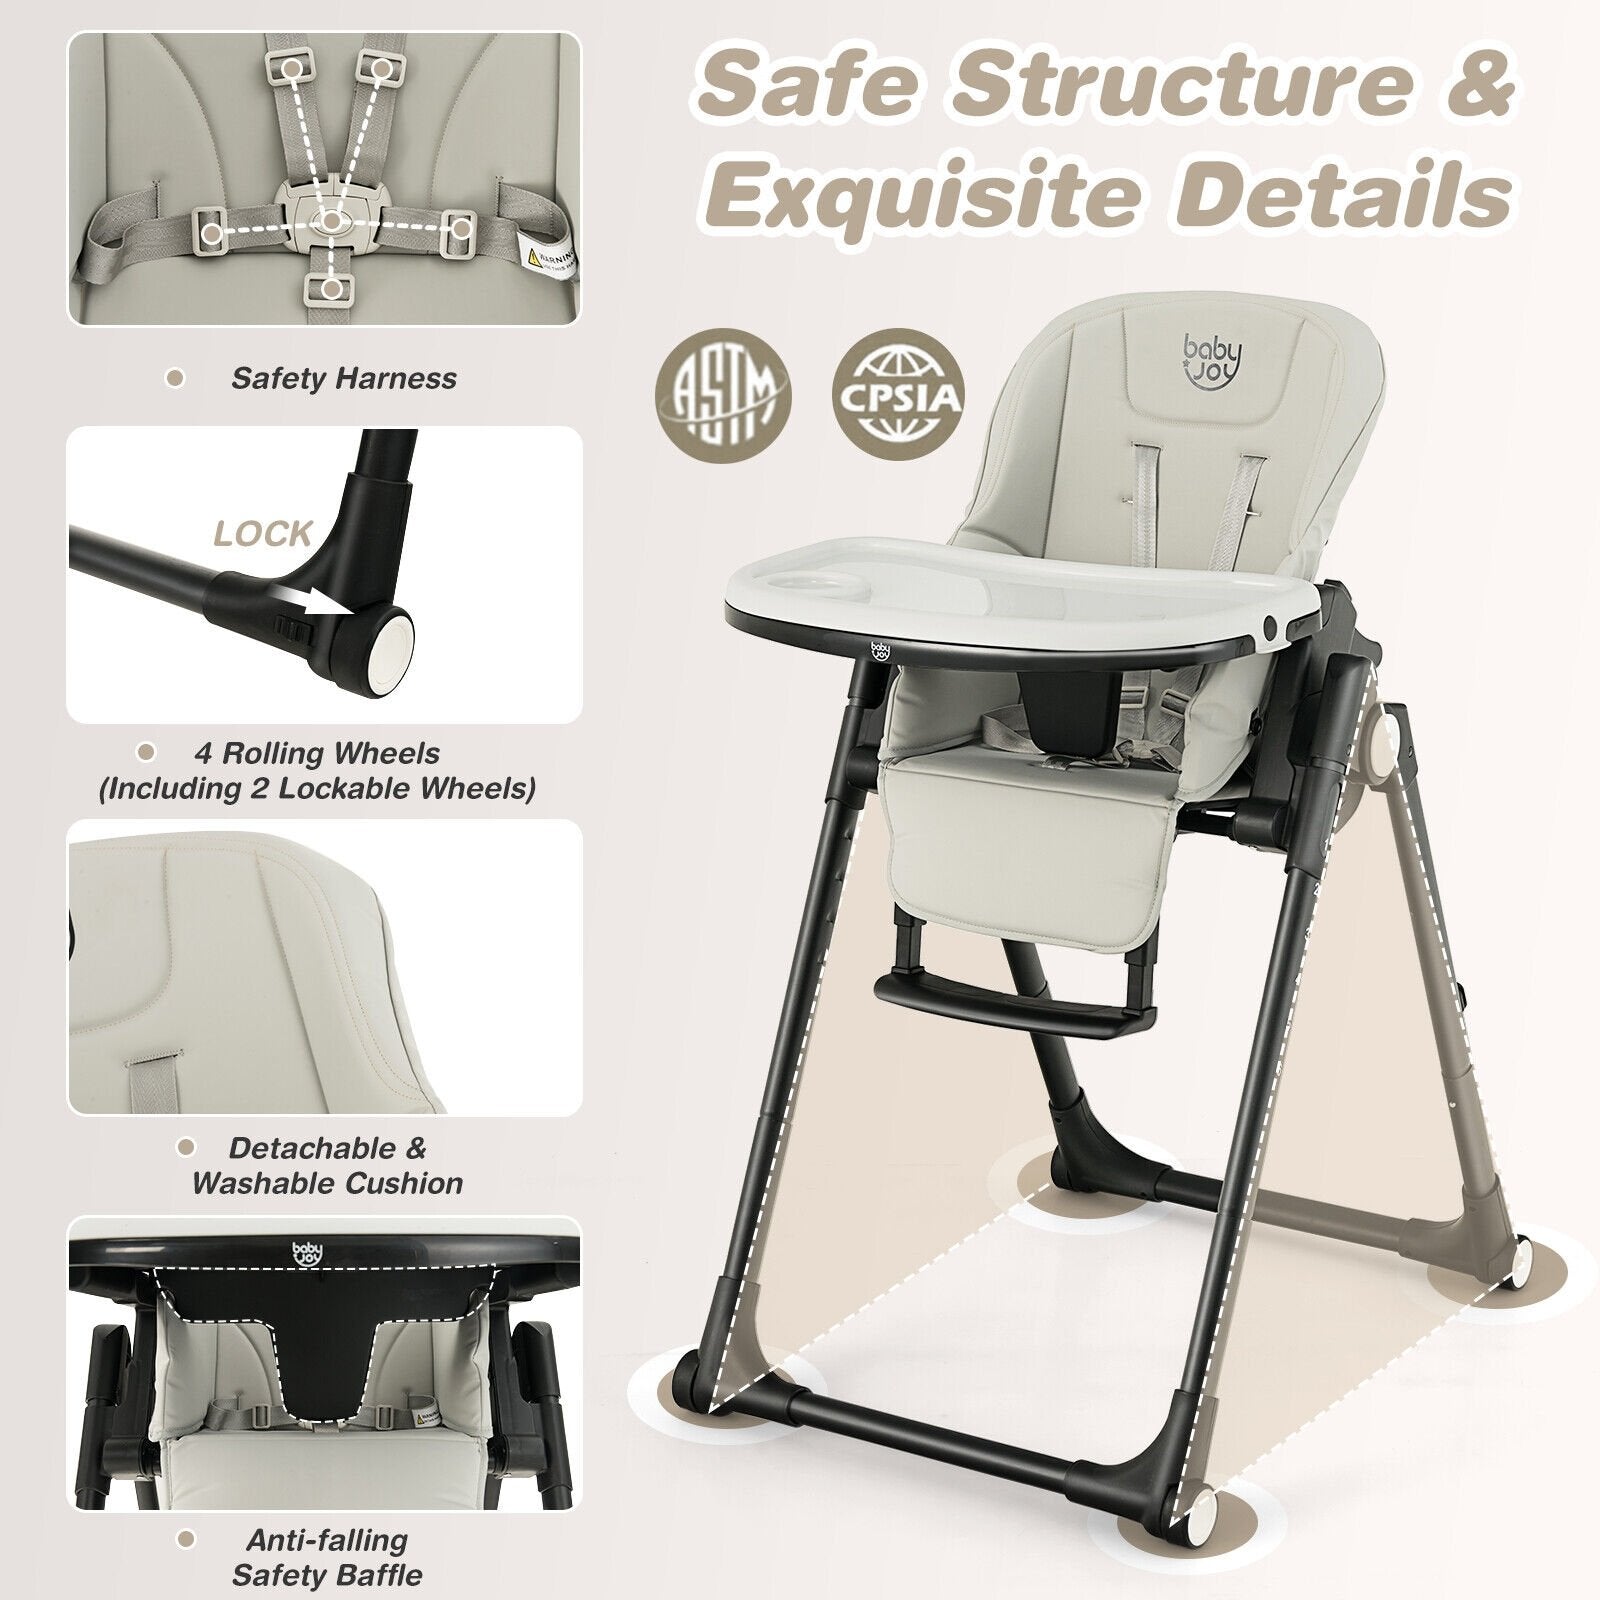 4-in-1 Baby High Chair with 6 Adjustable Heights, Gray - Gallery Canada